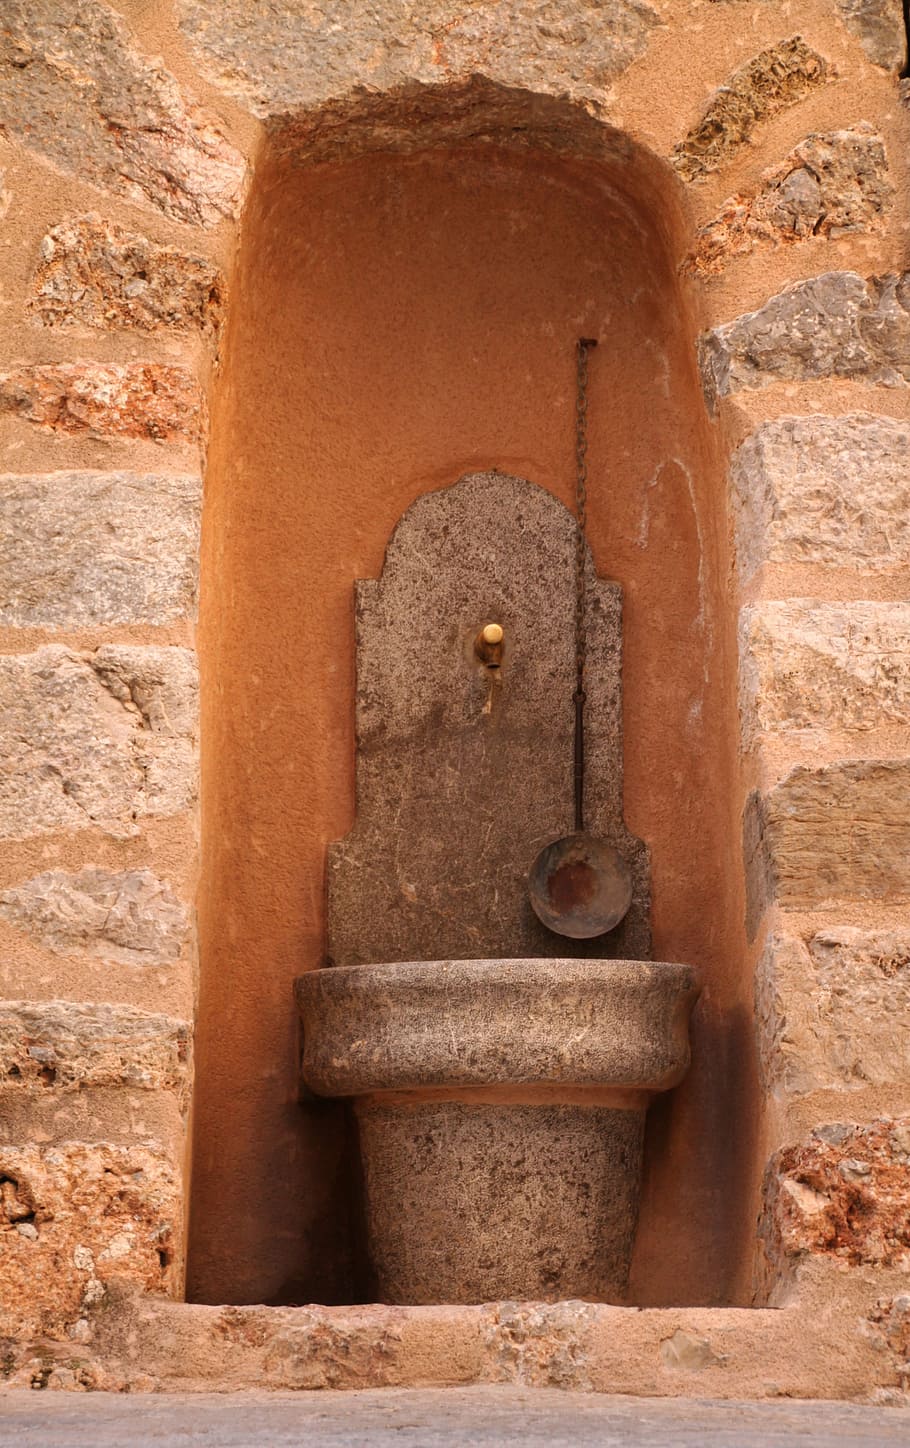 fountain, water basin, water fountain, architecture, wall, bricked, stone, stone wall, stones, building